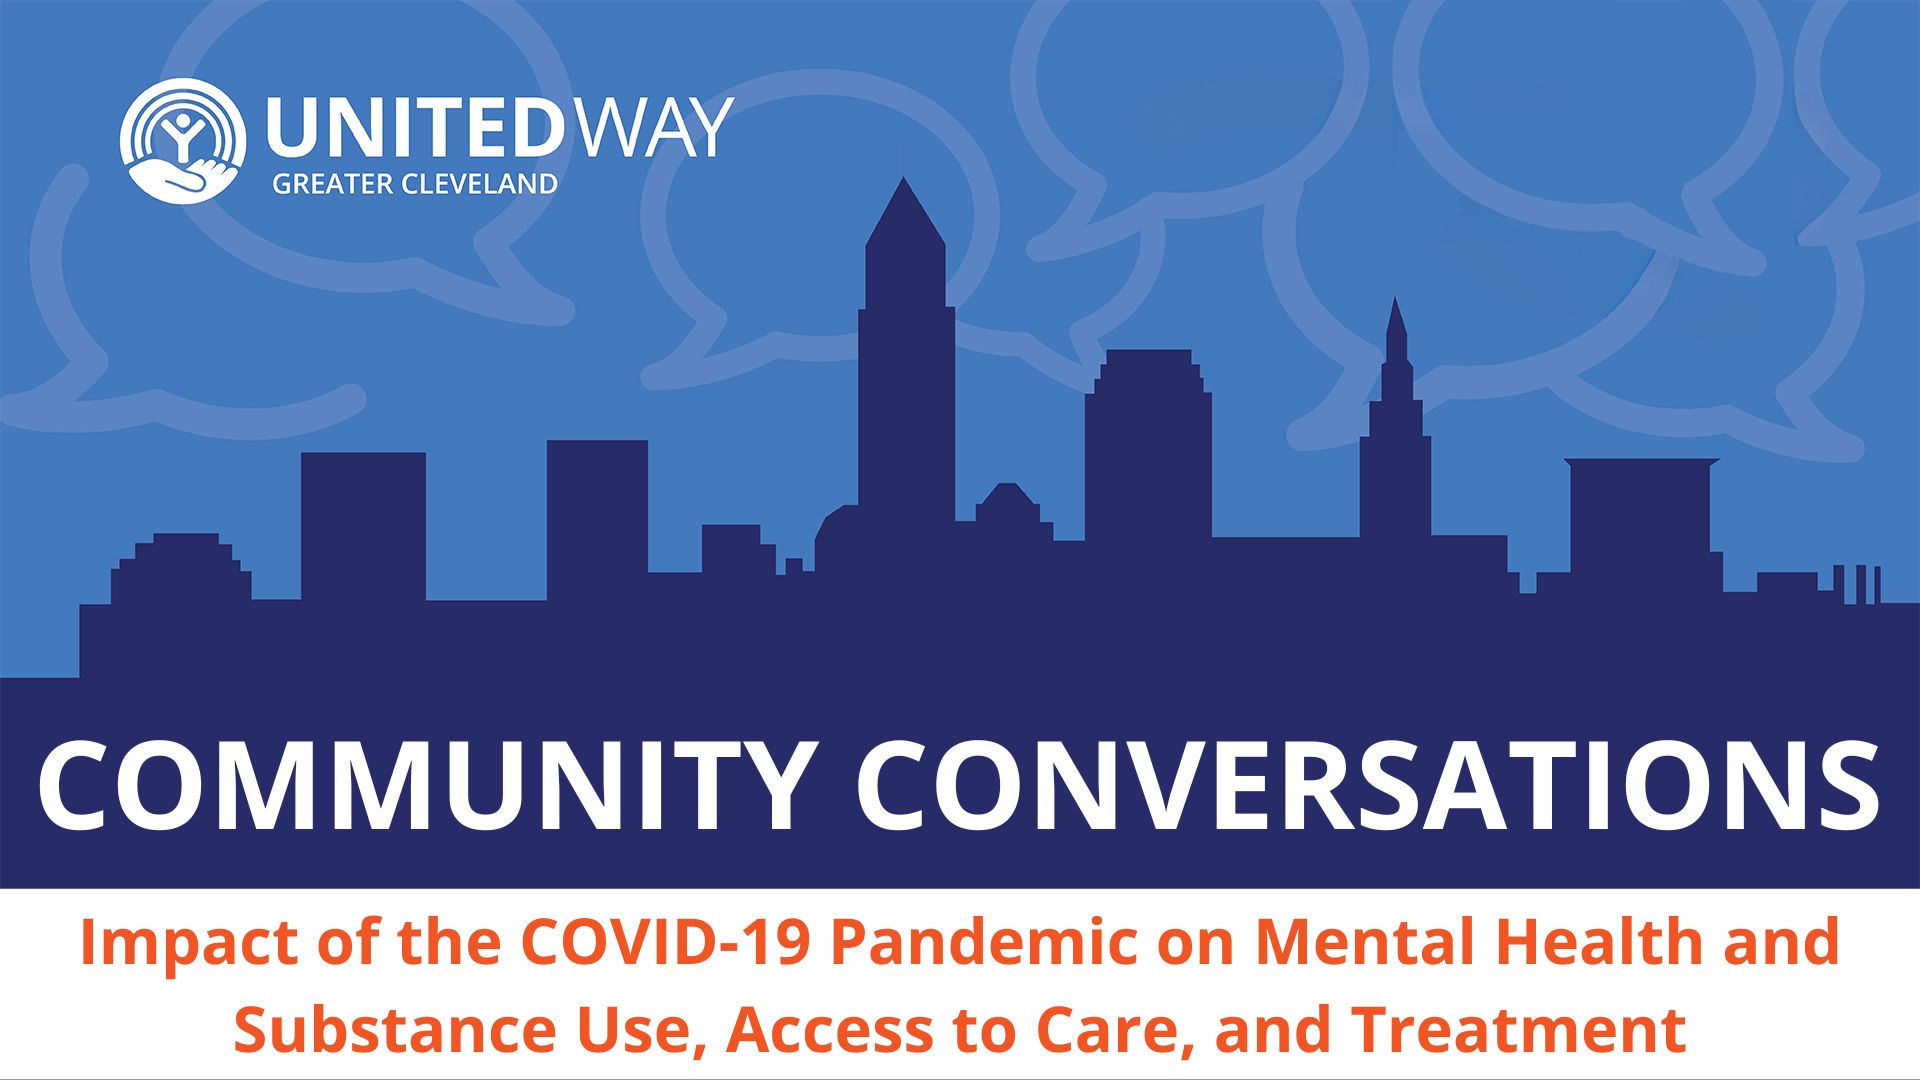 Impact of the COVID-19 Pandemic on Mental Health and Substance Use, Access to Care and Treatment